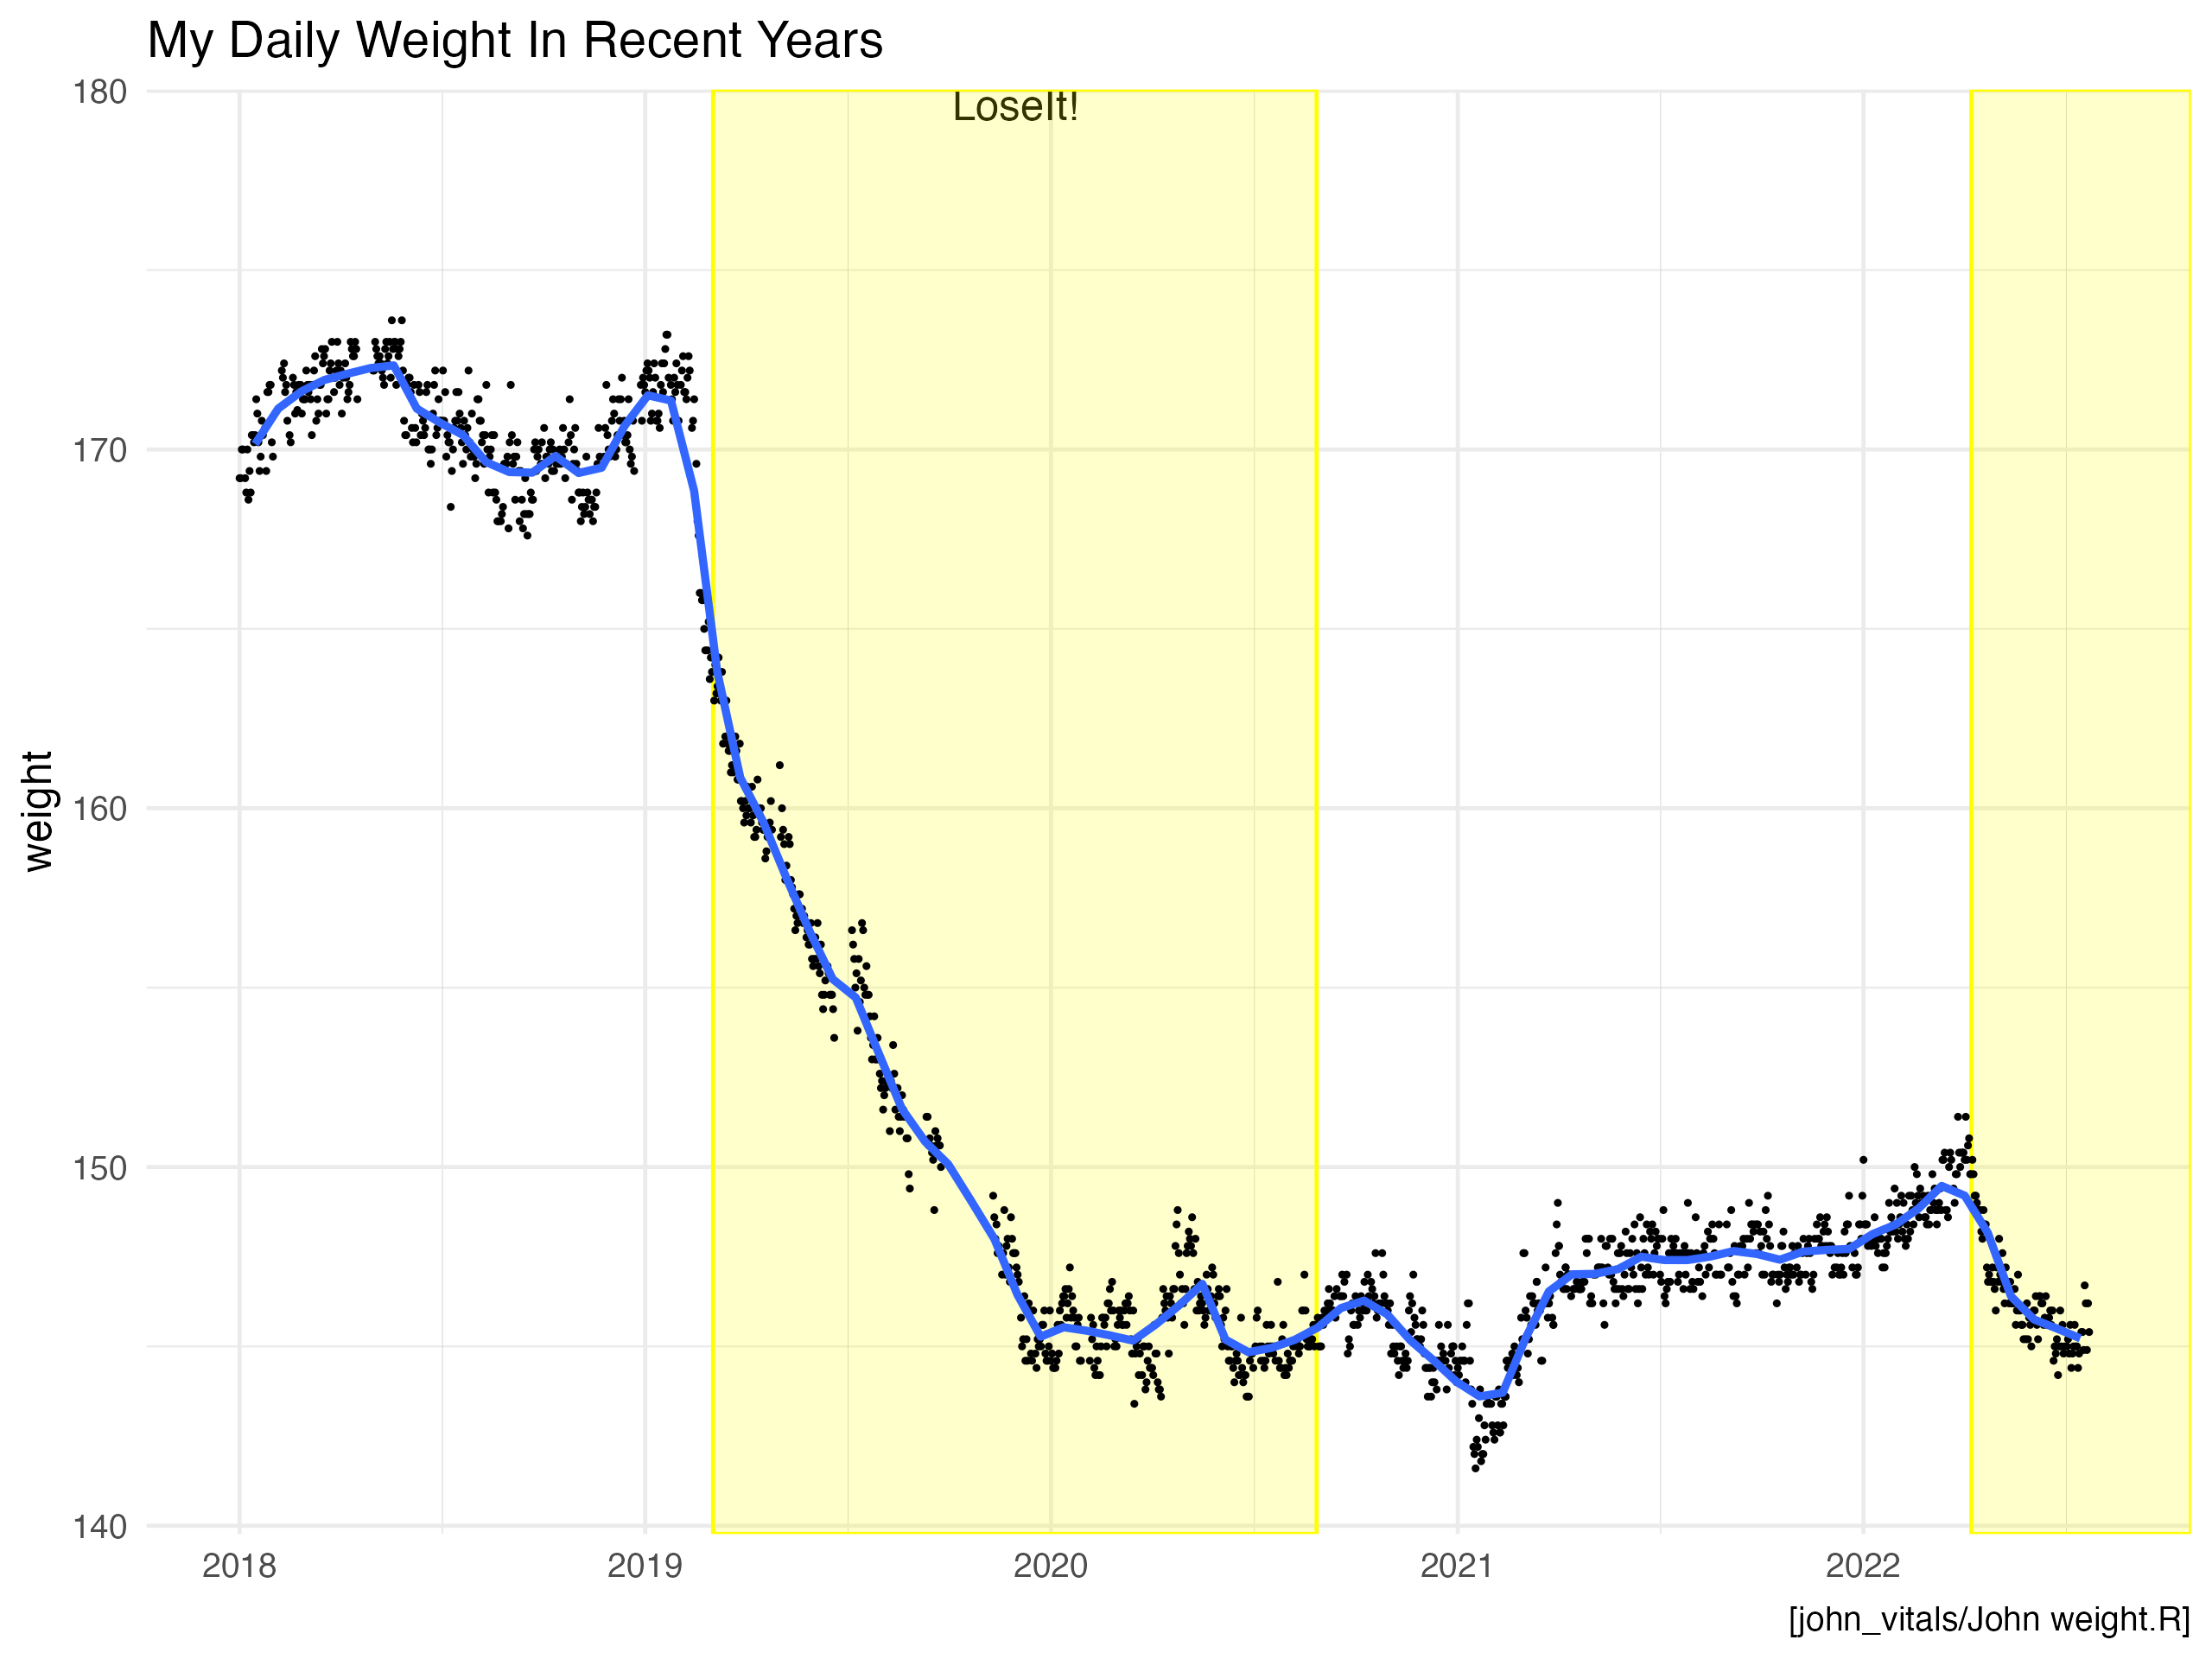 Detail of daily weight since 2018 to show more clearly the decrease while using LoseIt to count calories